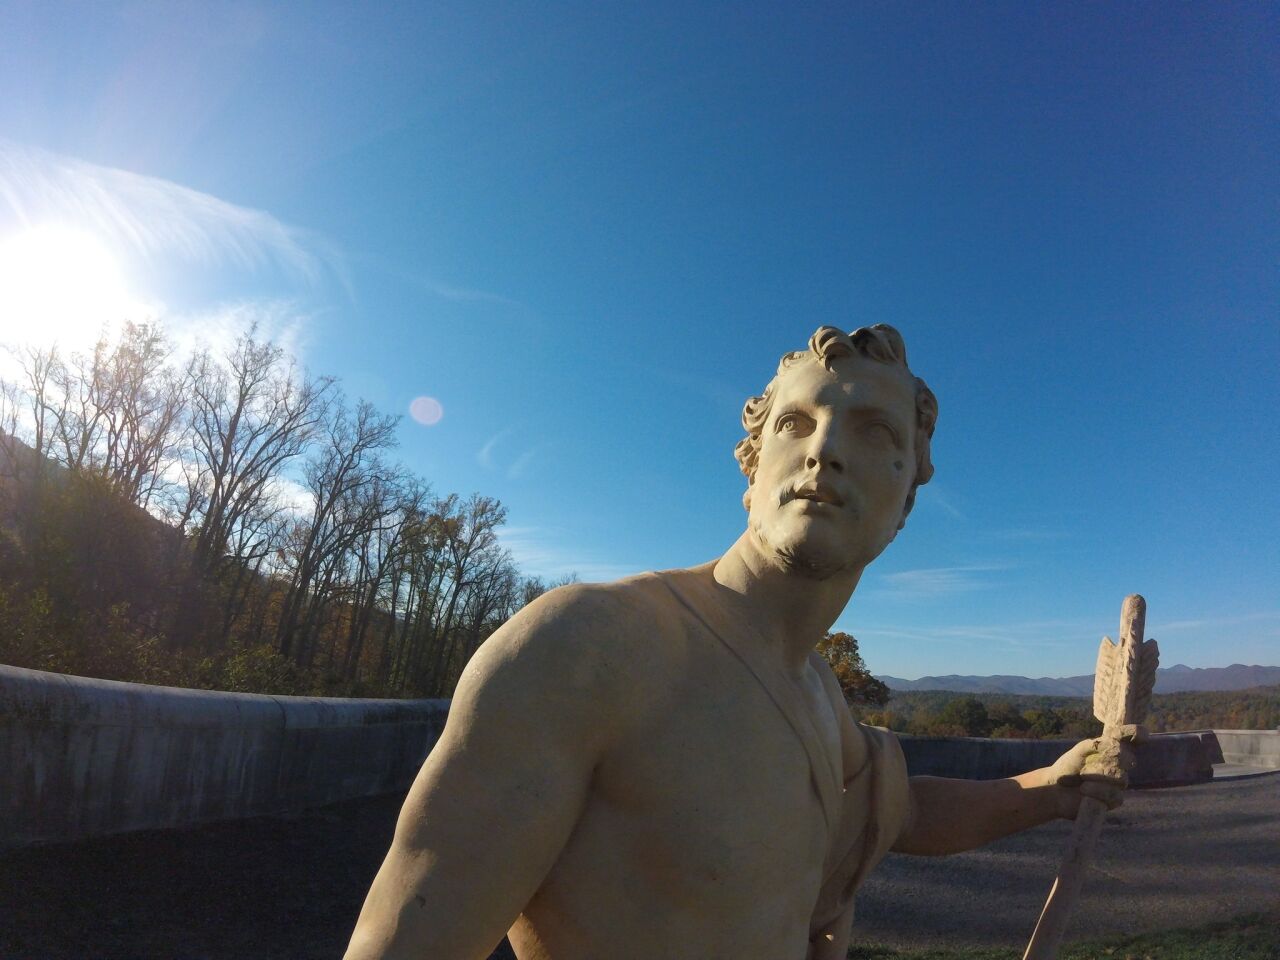 Early sun slants down Oct. 23 on the statuary on the grounds of the Biltmore Estate, Asheville, N.C.